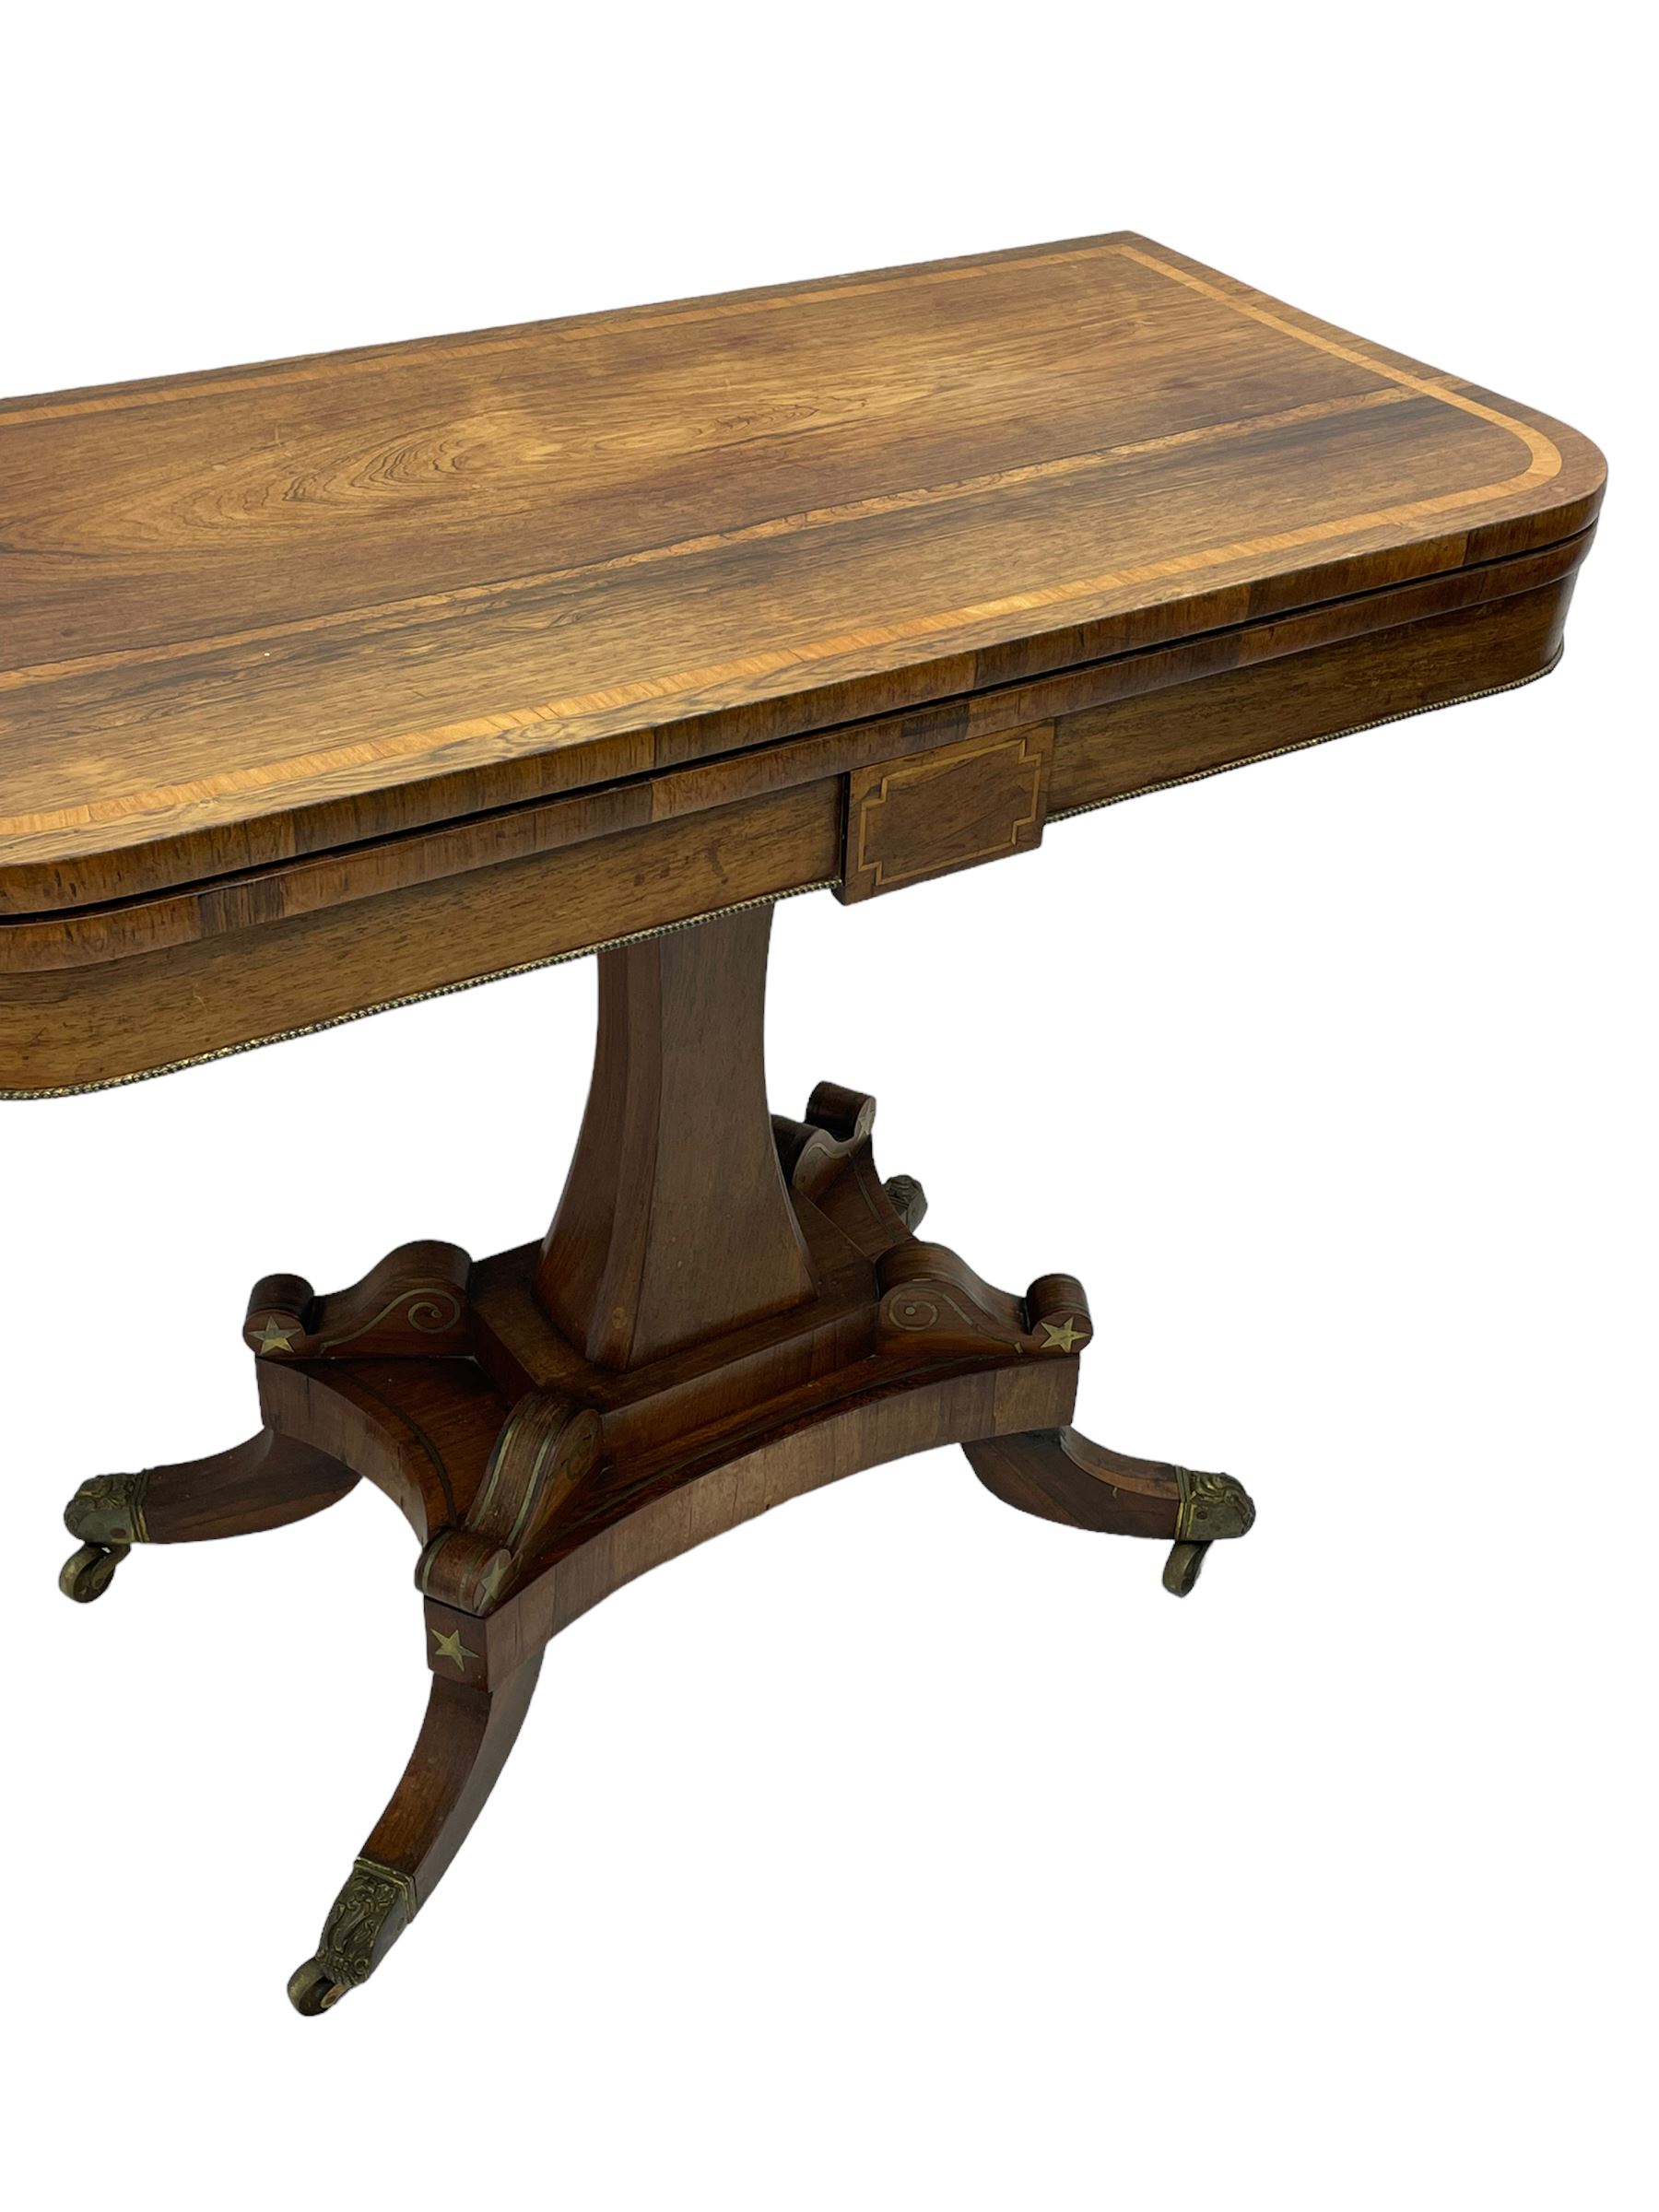 Regency rosewood and brass inlaid card table - Image 6 of 15